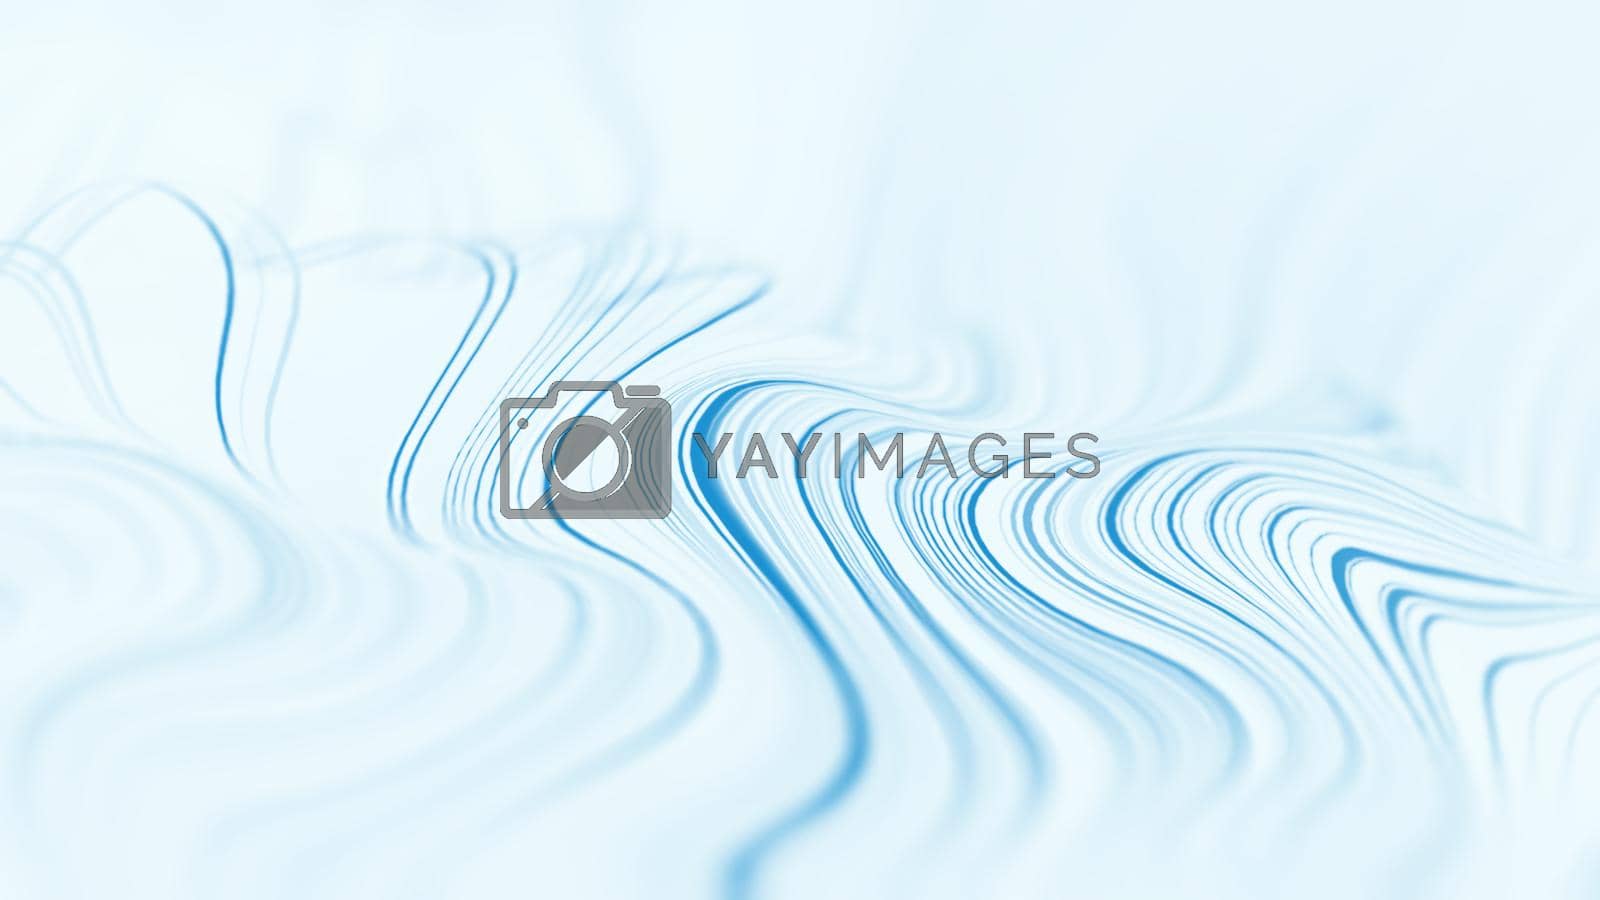 Royalty free image of Blue abstract wave on white background. Blue digital illustration. by DmytroRazinkov